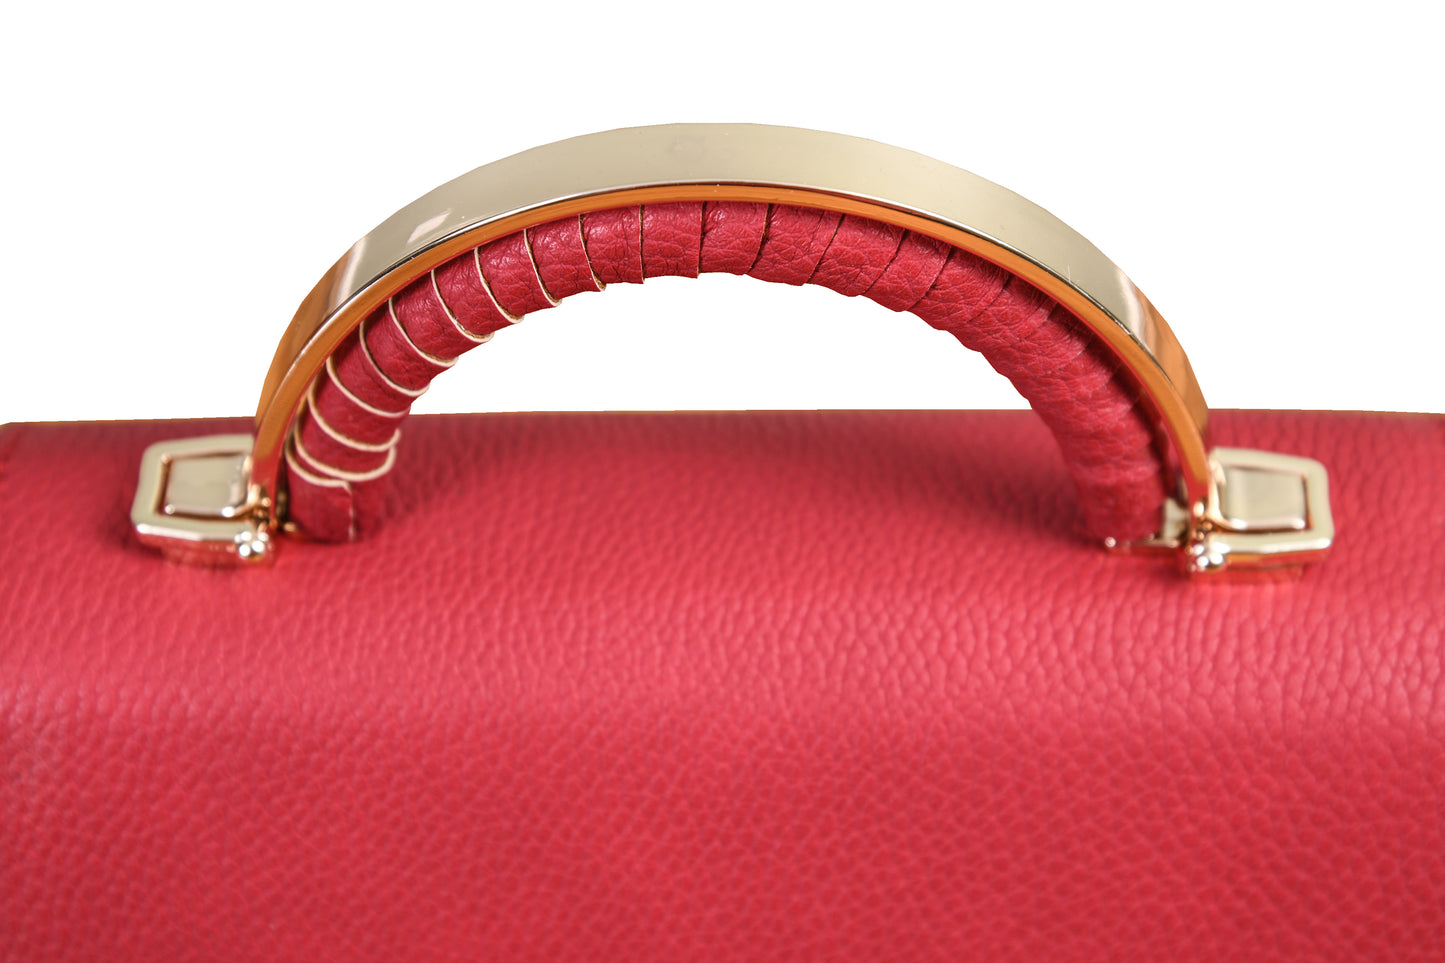 Mini Crossbody Pebble Grain Faux Leather Scarlet Red Handbag made by Dewi Maya gold arched handle available at the best boutique in Upstate South Carolina Spartanburg Greenville Dewi Maya Boutique